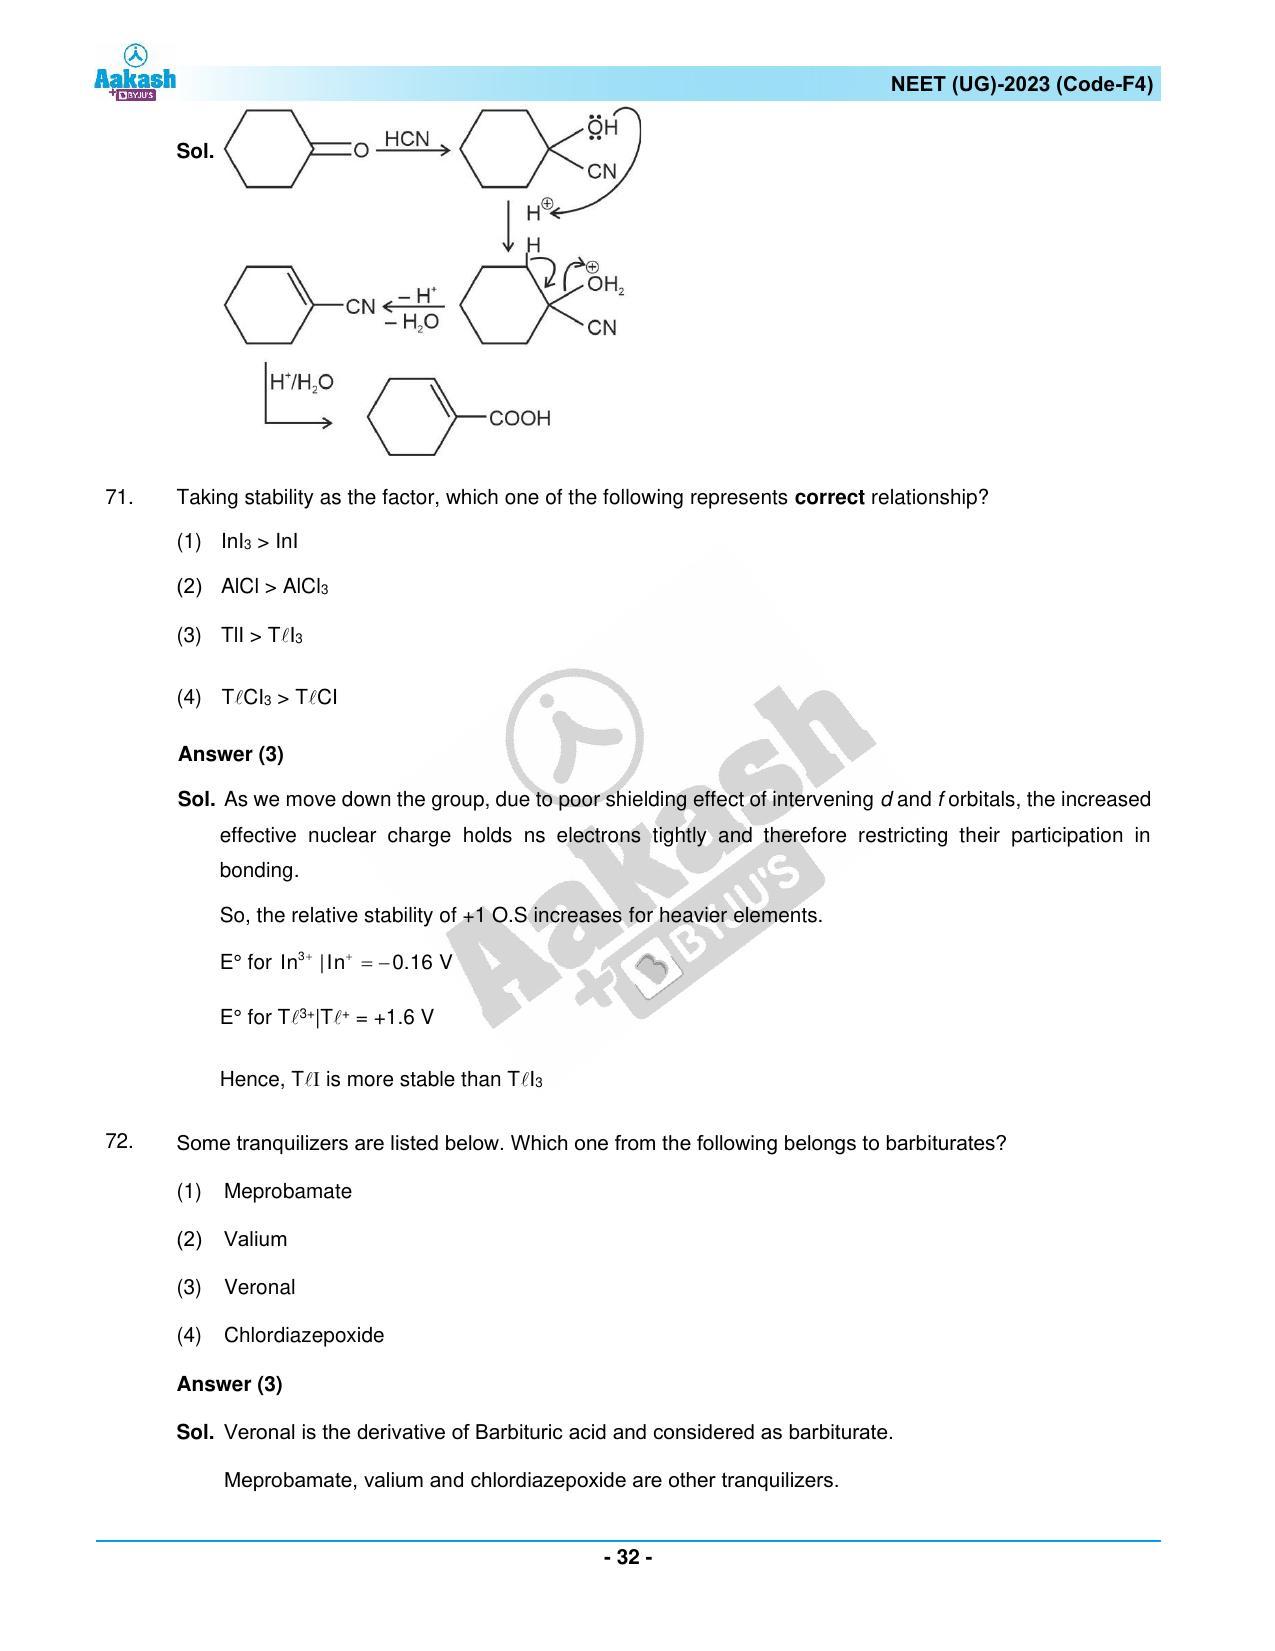 NEET 2023 Question Paper F4 - Page 32